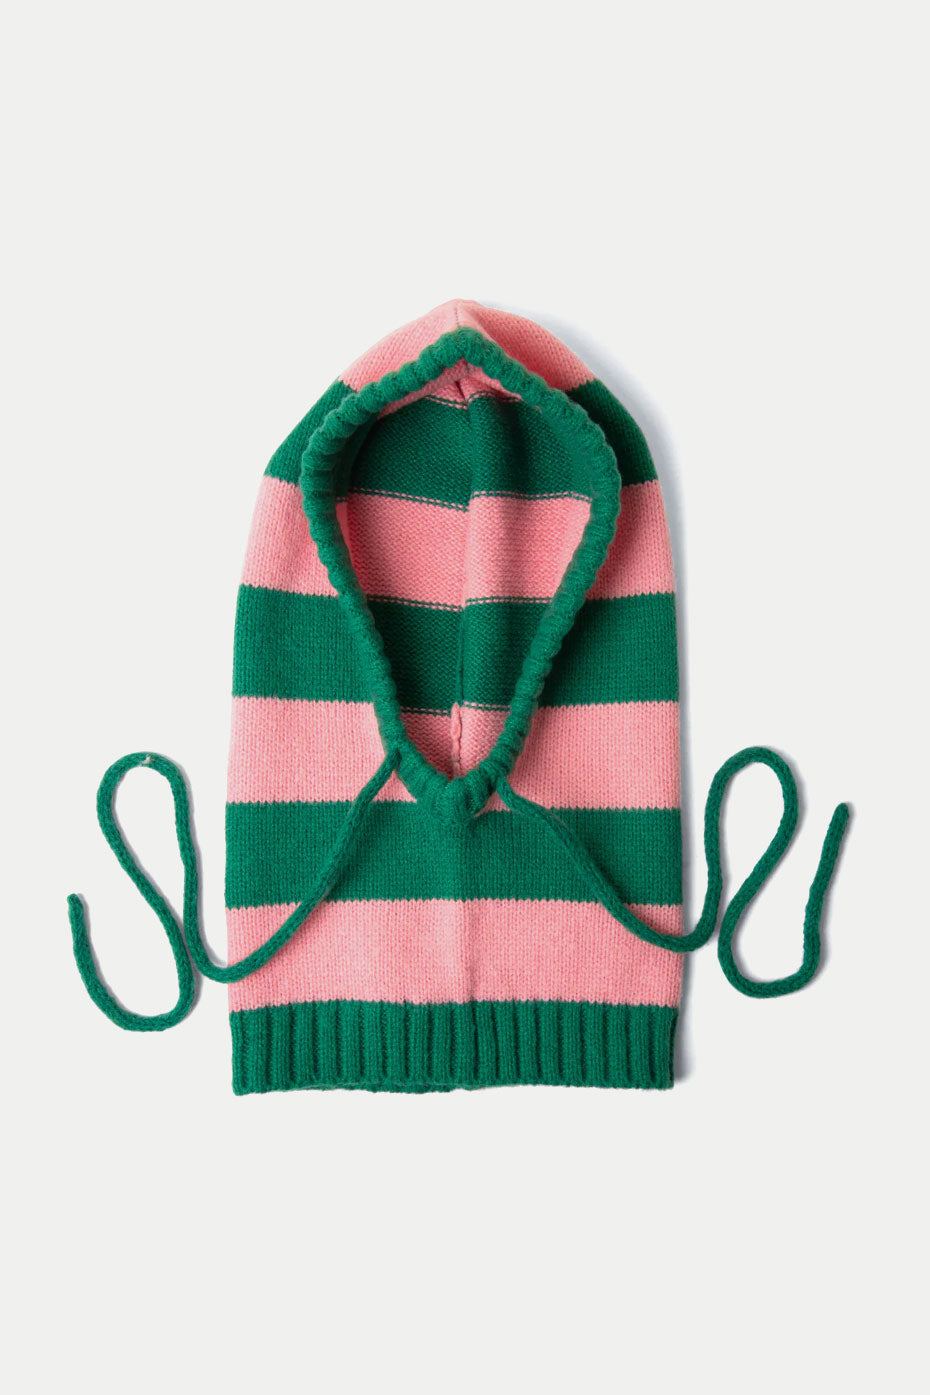 Damson Madder Pink And Green Hood With Tie